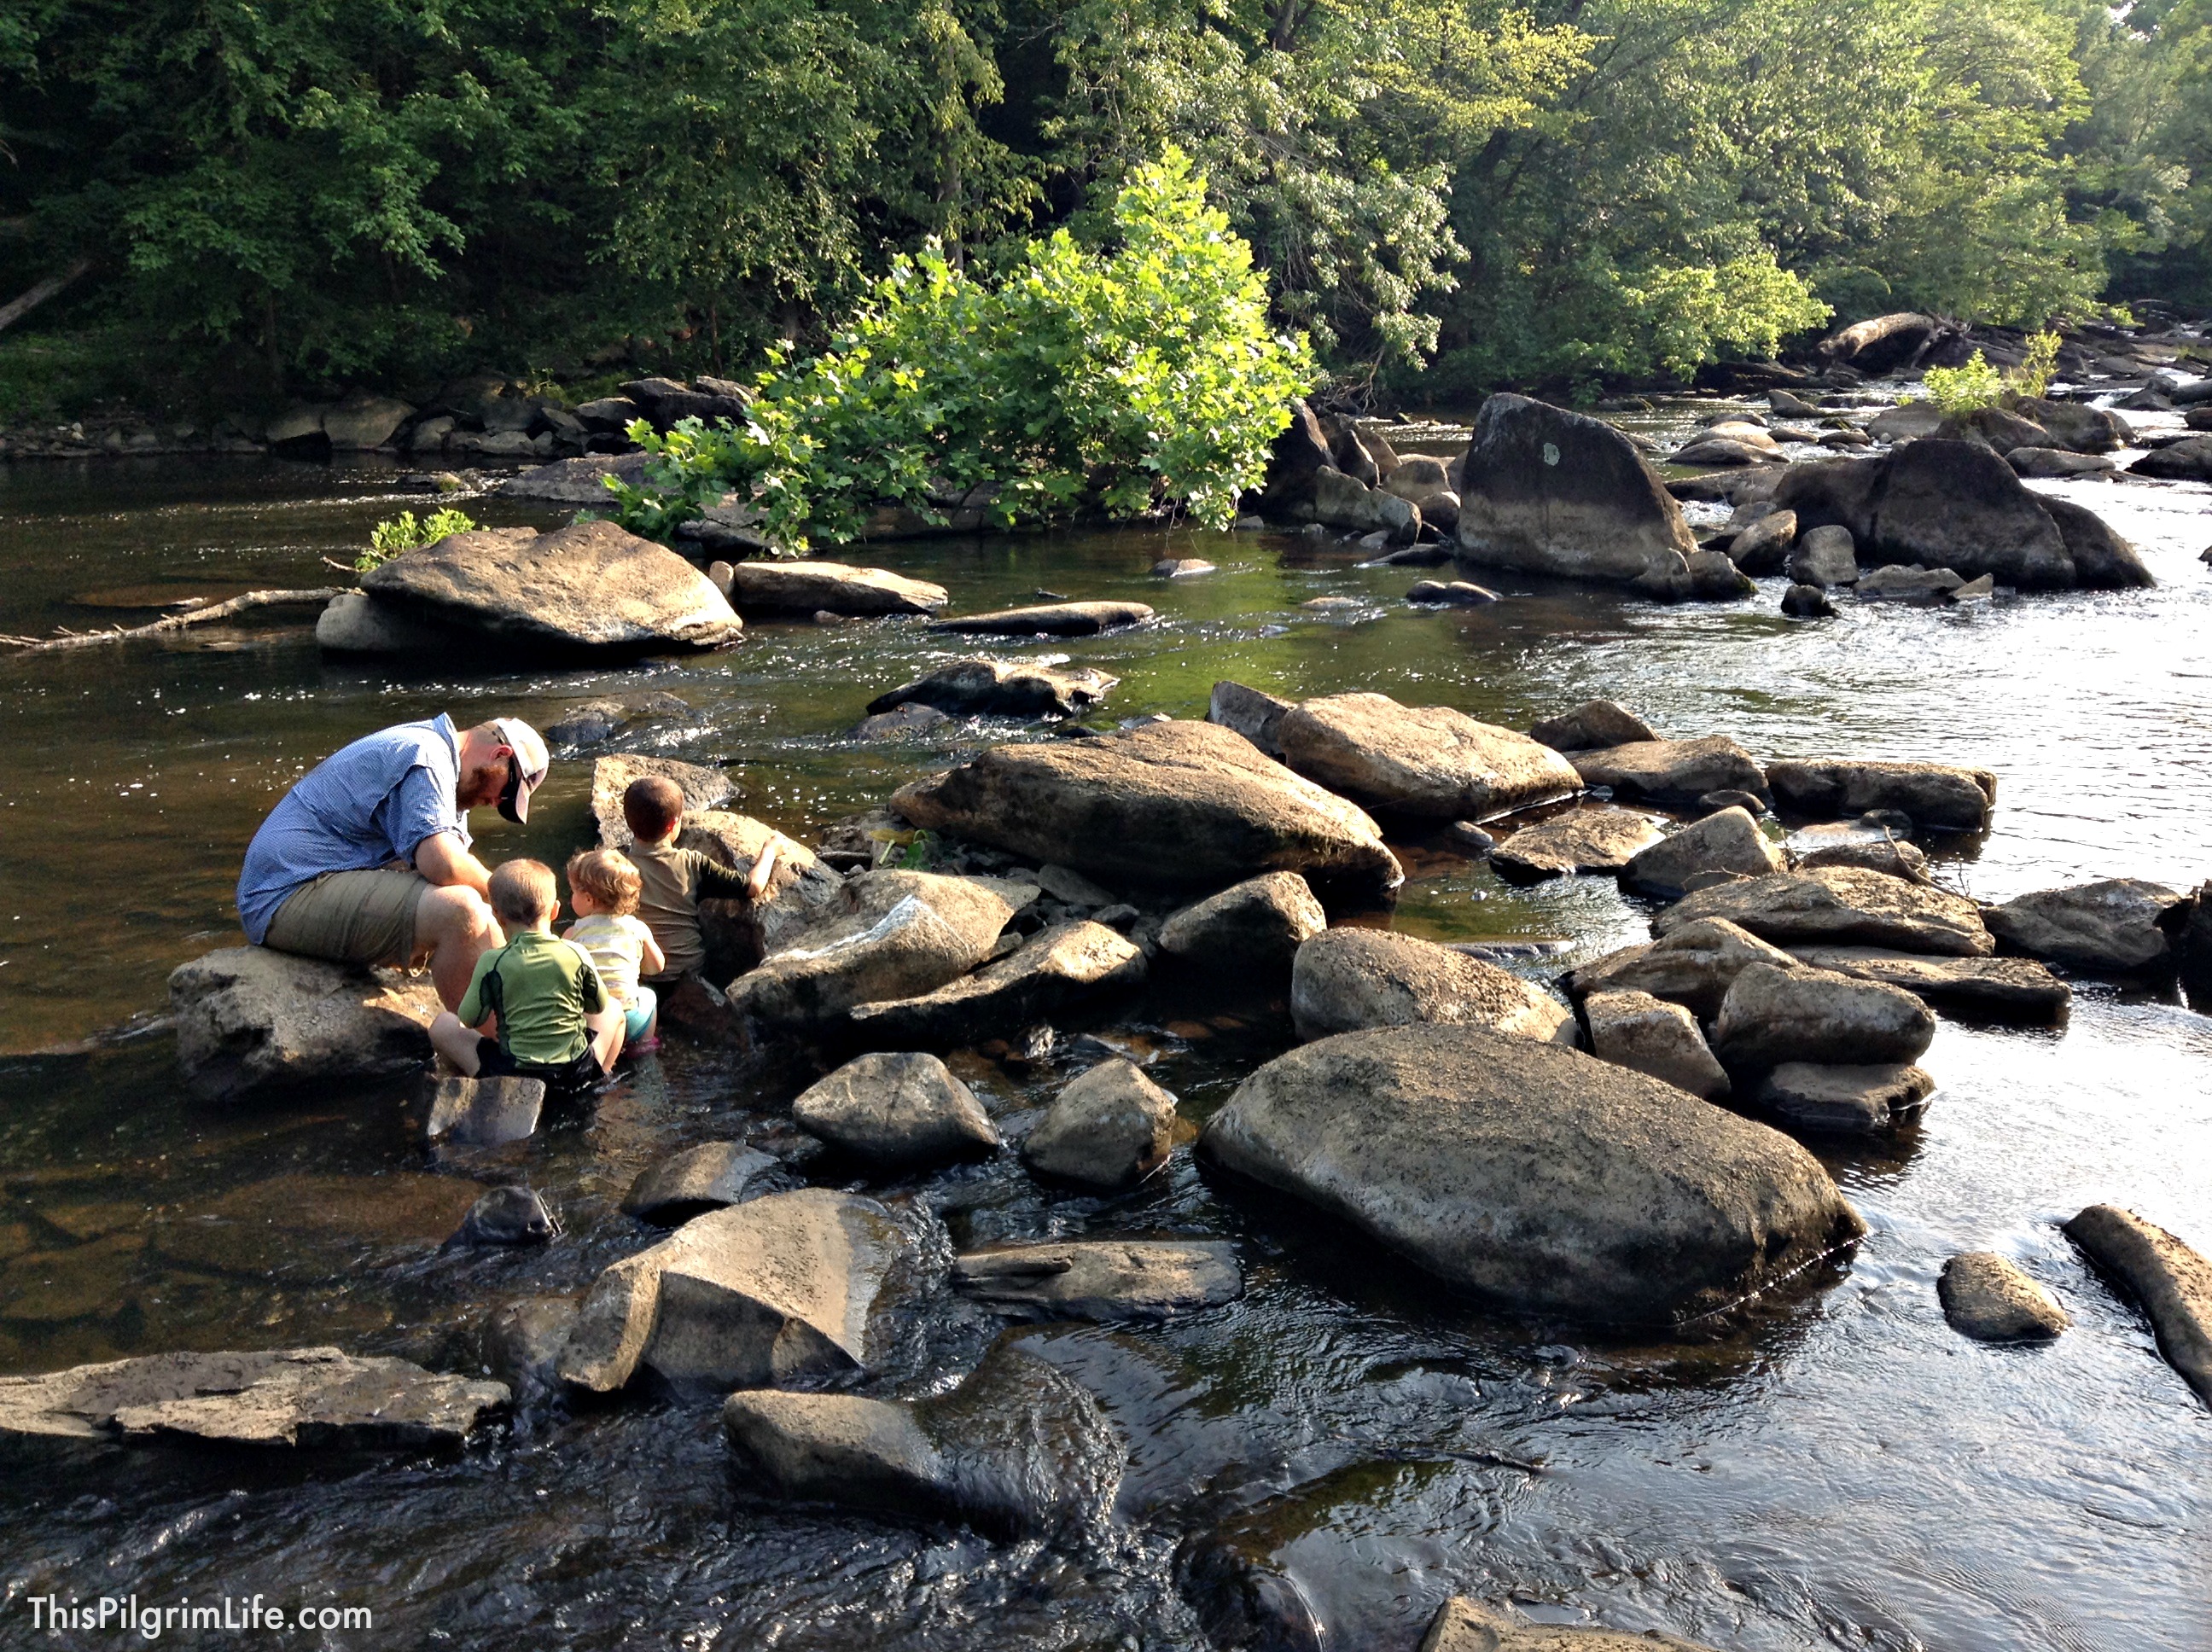 3 Reasons to Explore Wild Water with Kids & Tips to Keep Everyone Safe and Having Fun